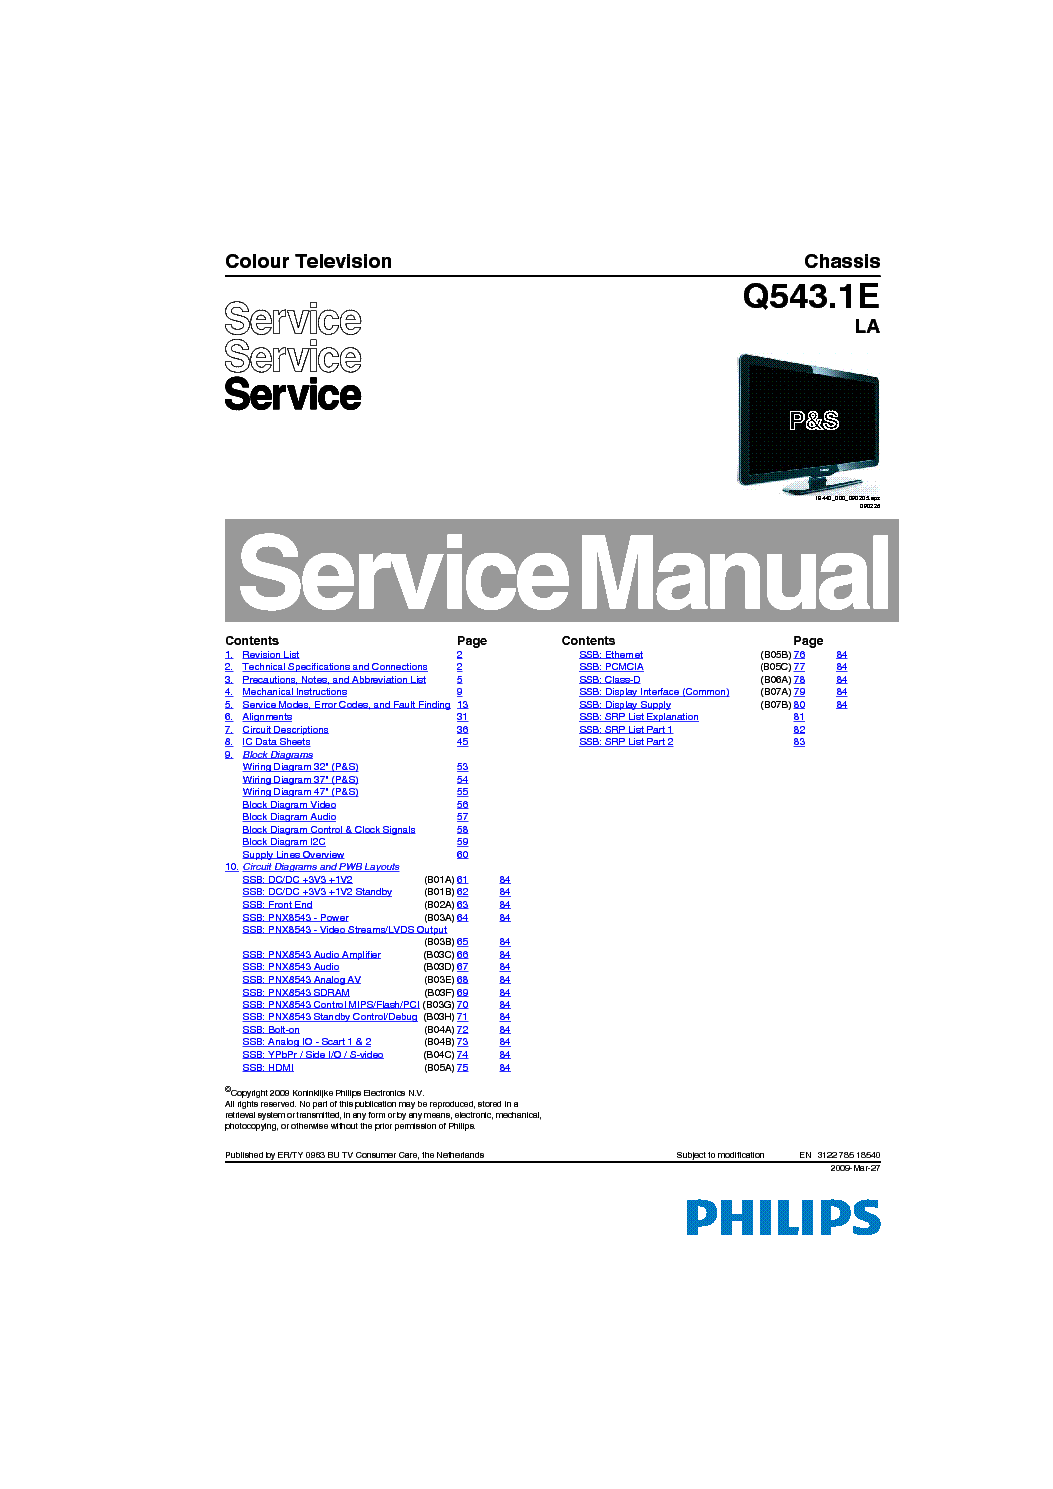 PHILIPS Q543.1E LA CHASSIS LCD service manual (1st page)